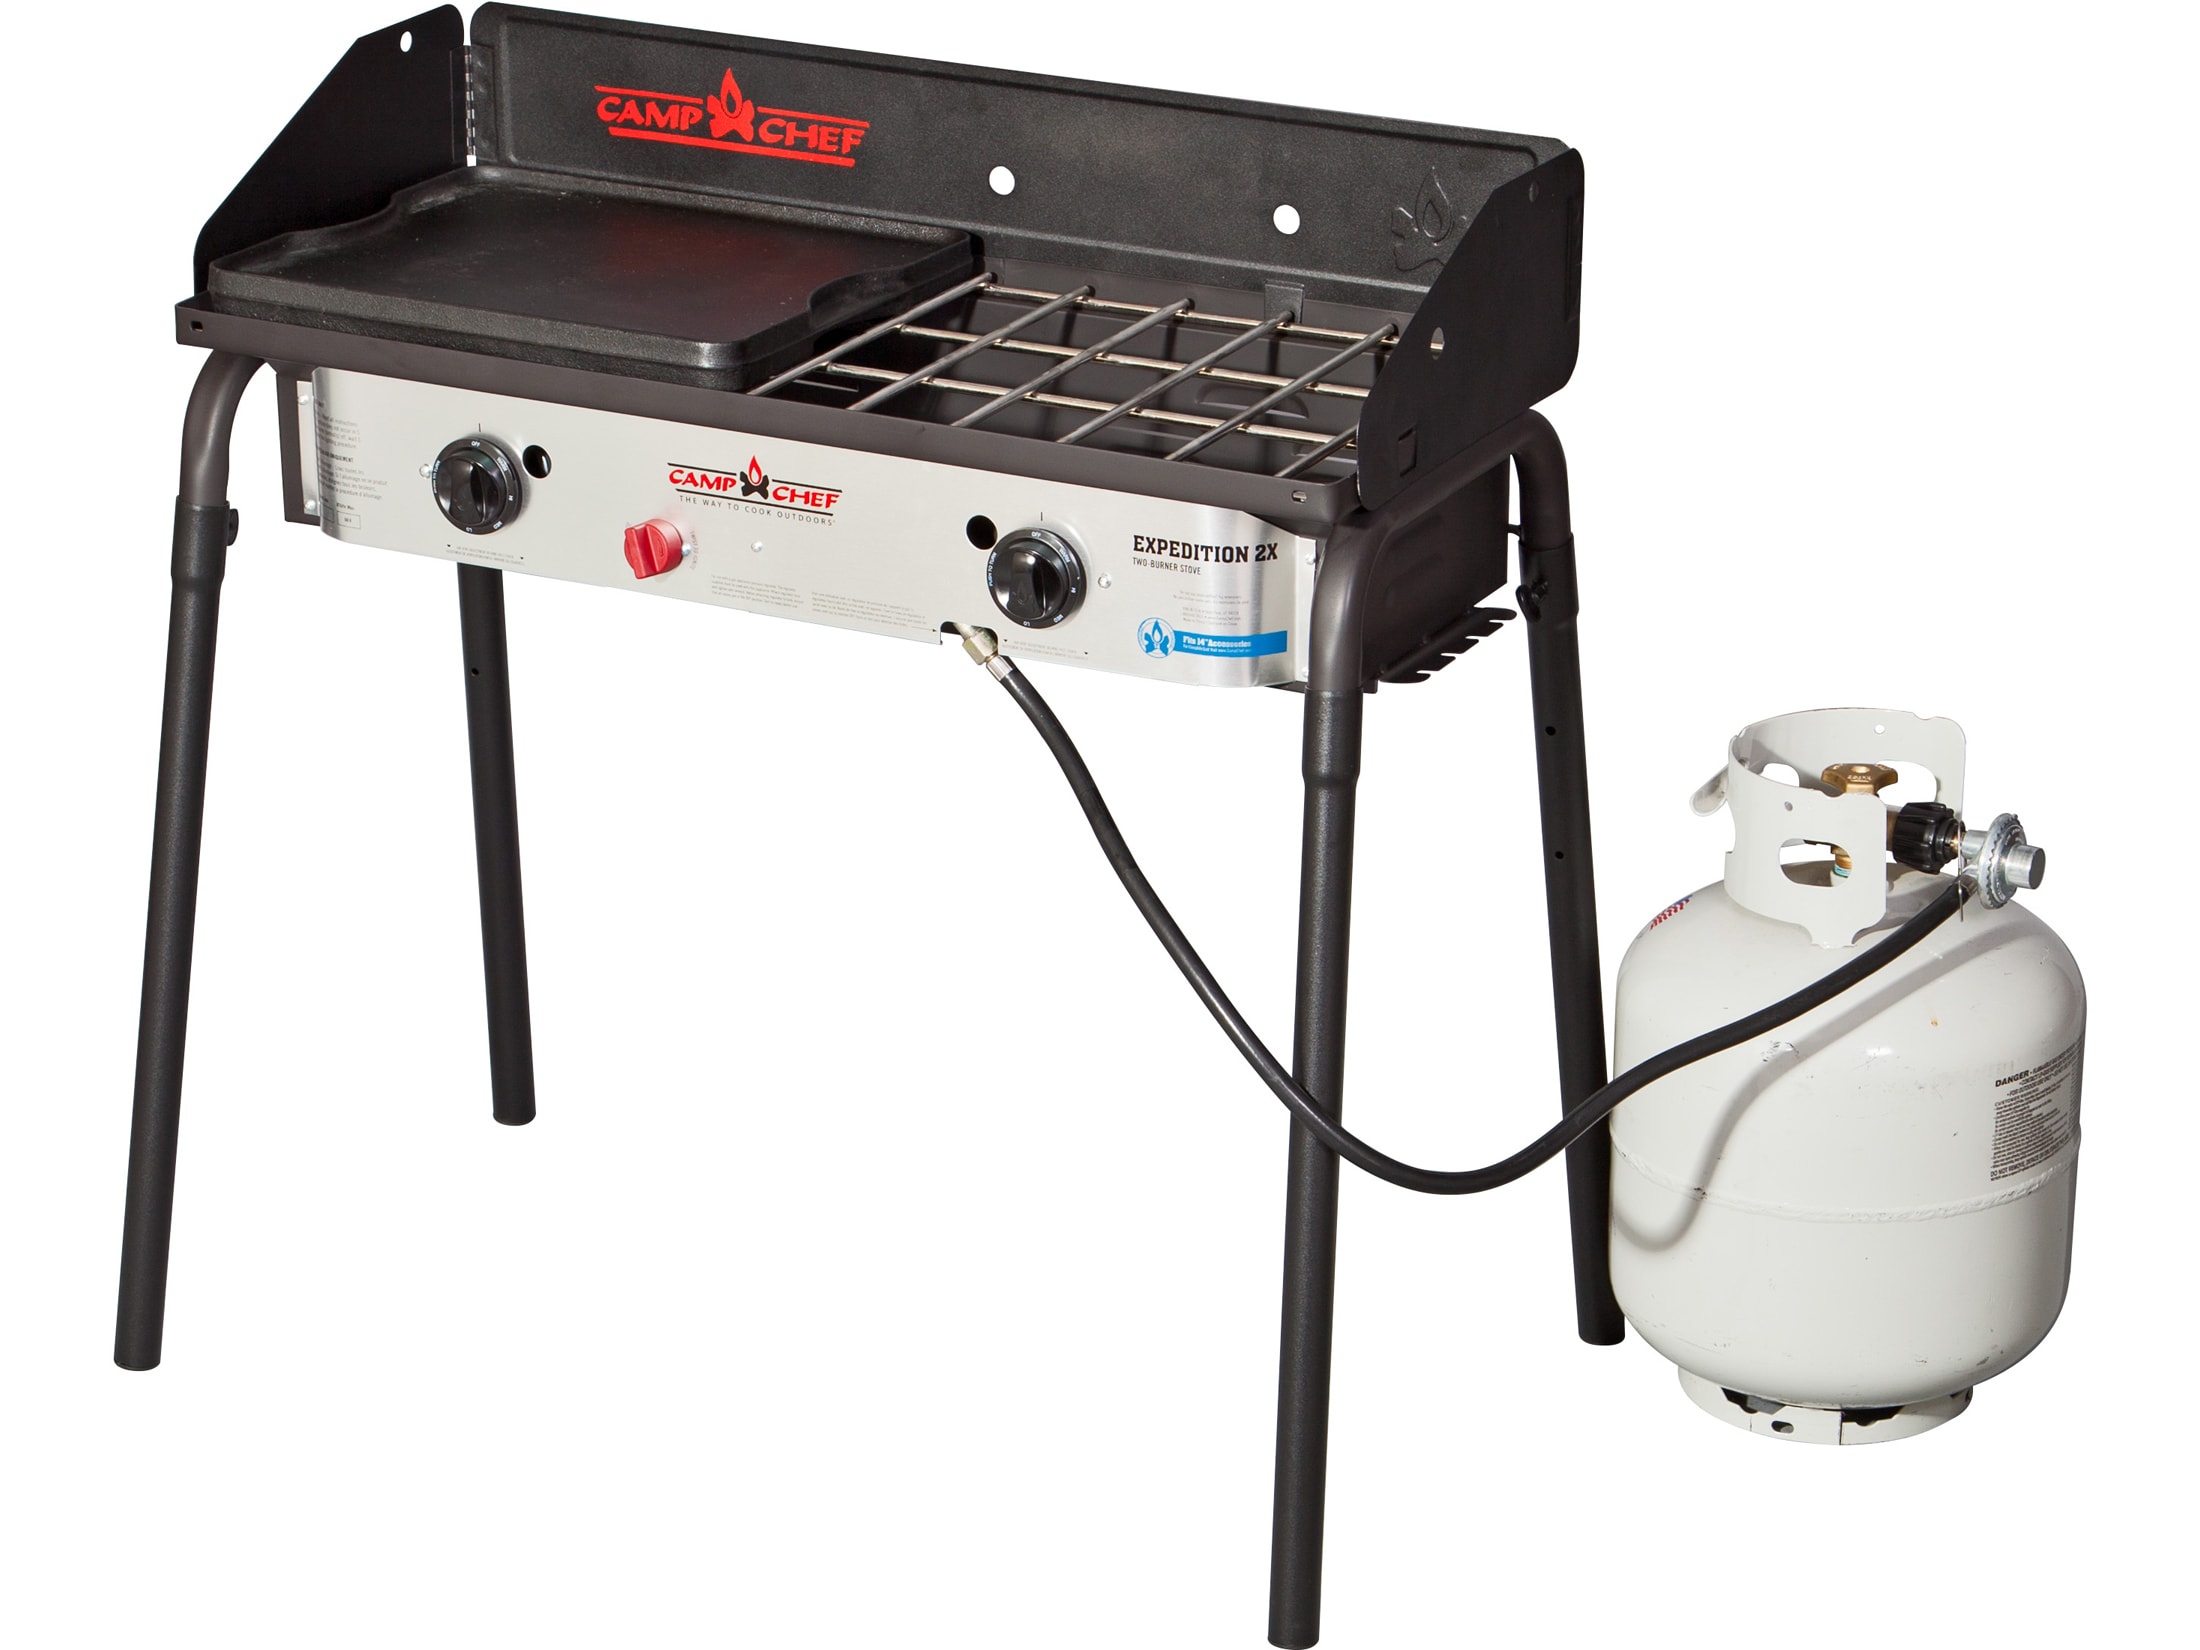 Camp Chef Expedition 2X Burner Cooking System Stove